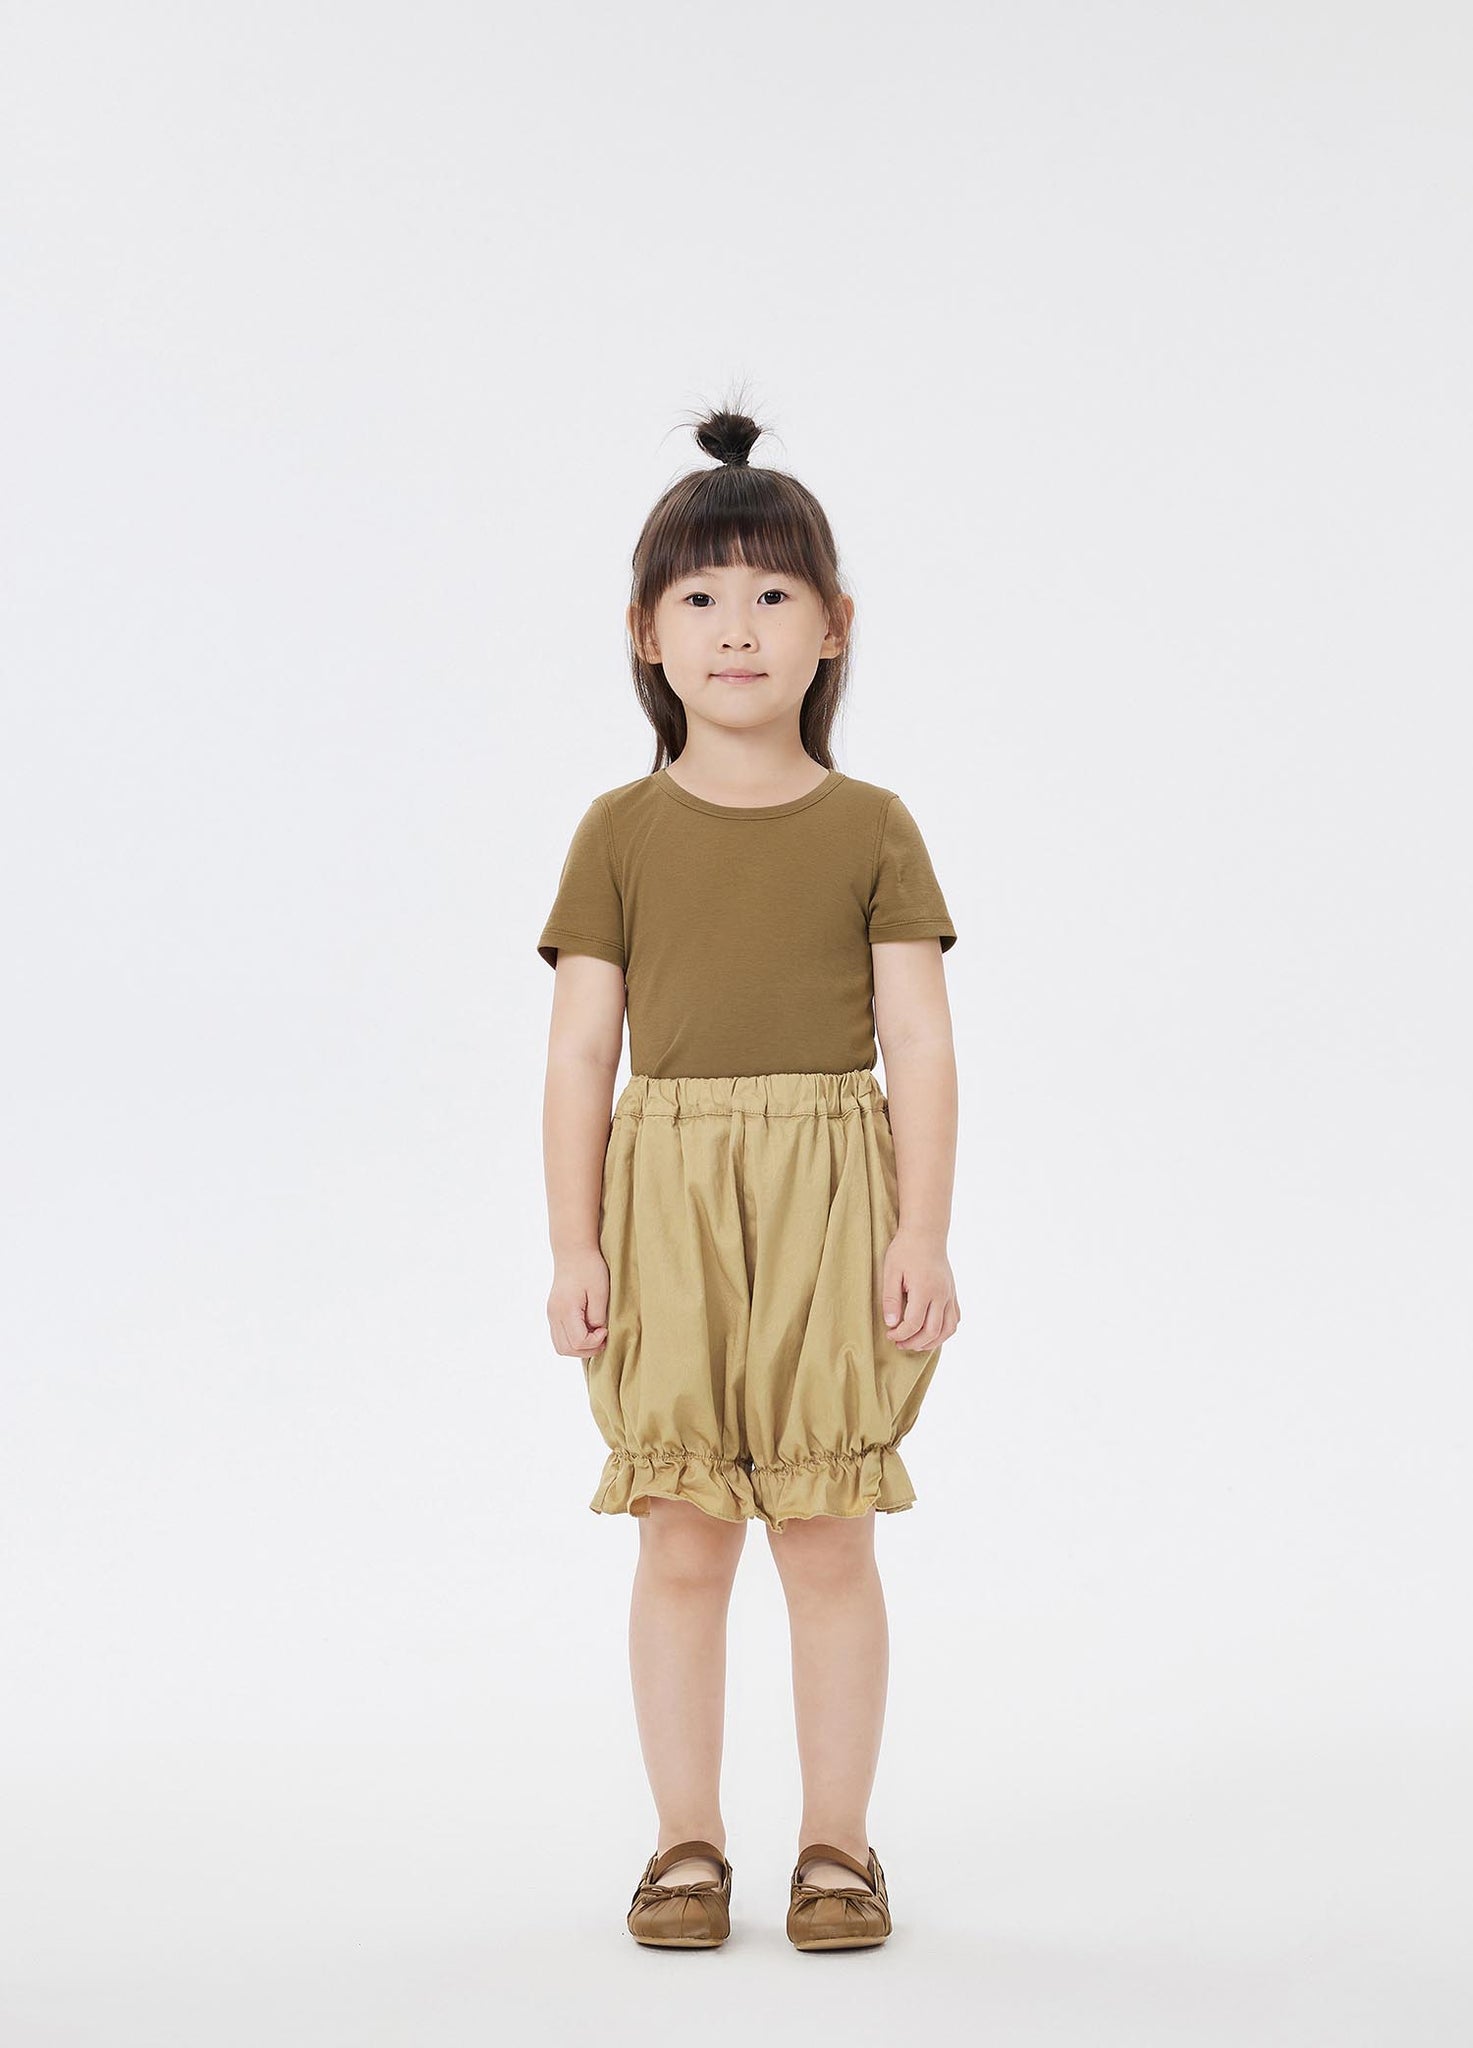 Pants / jnby by JNBY Lace Latern Shorts